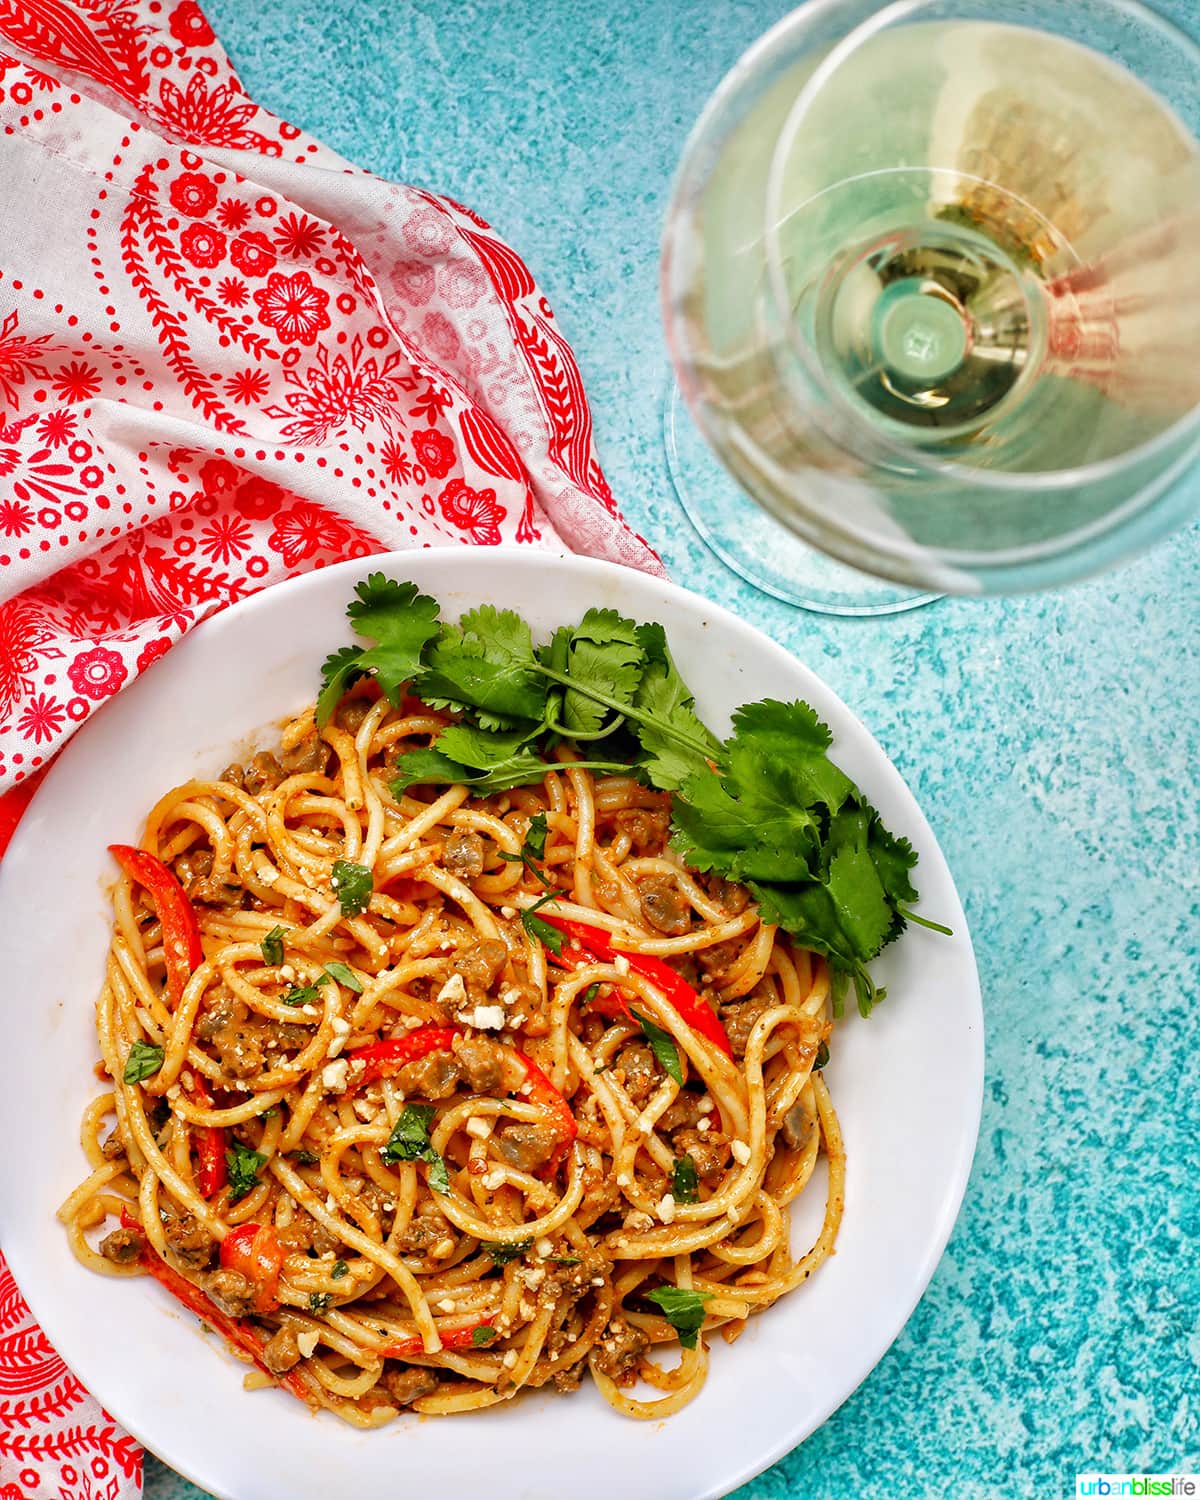 Thai Red Curry Pasta with glass of white wine